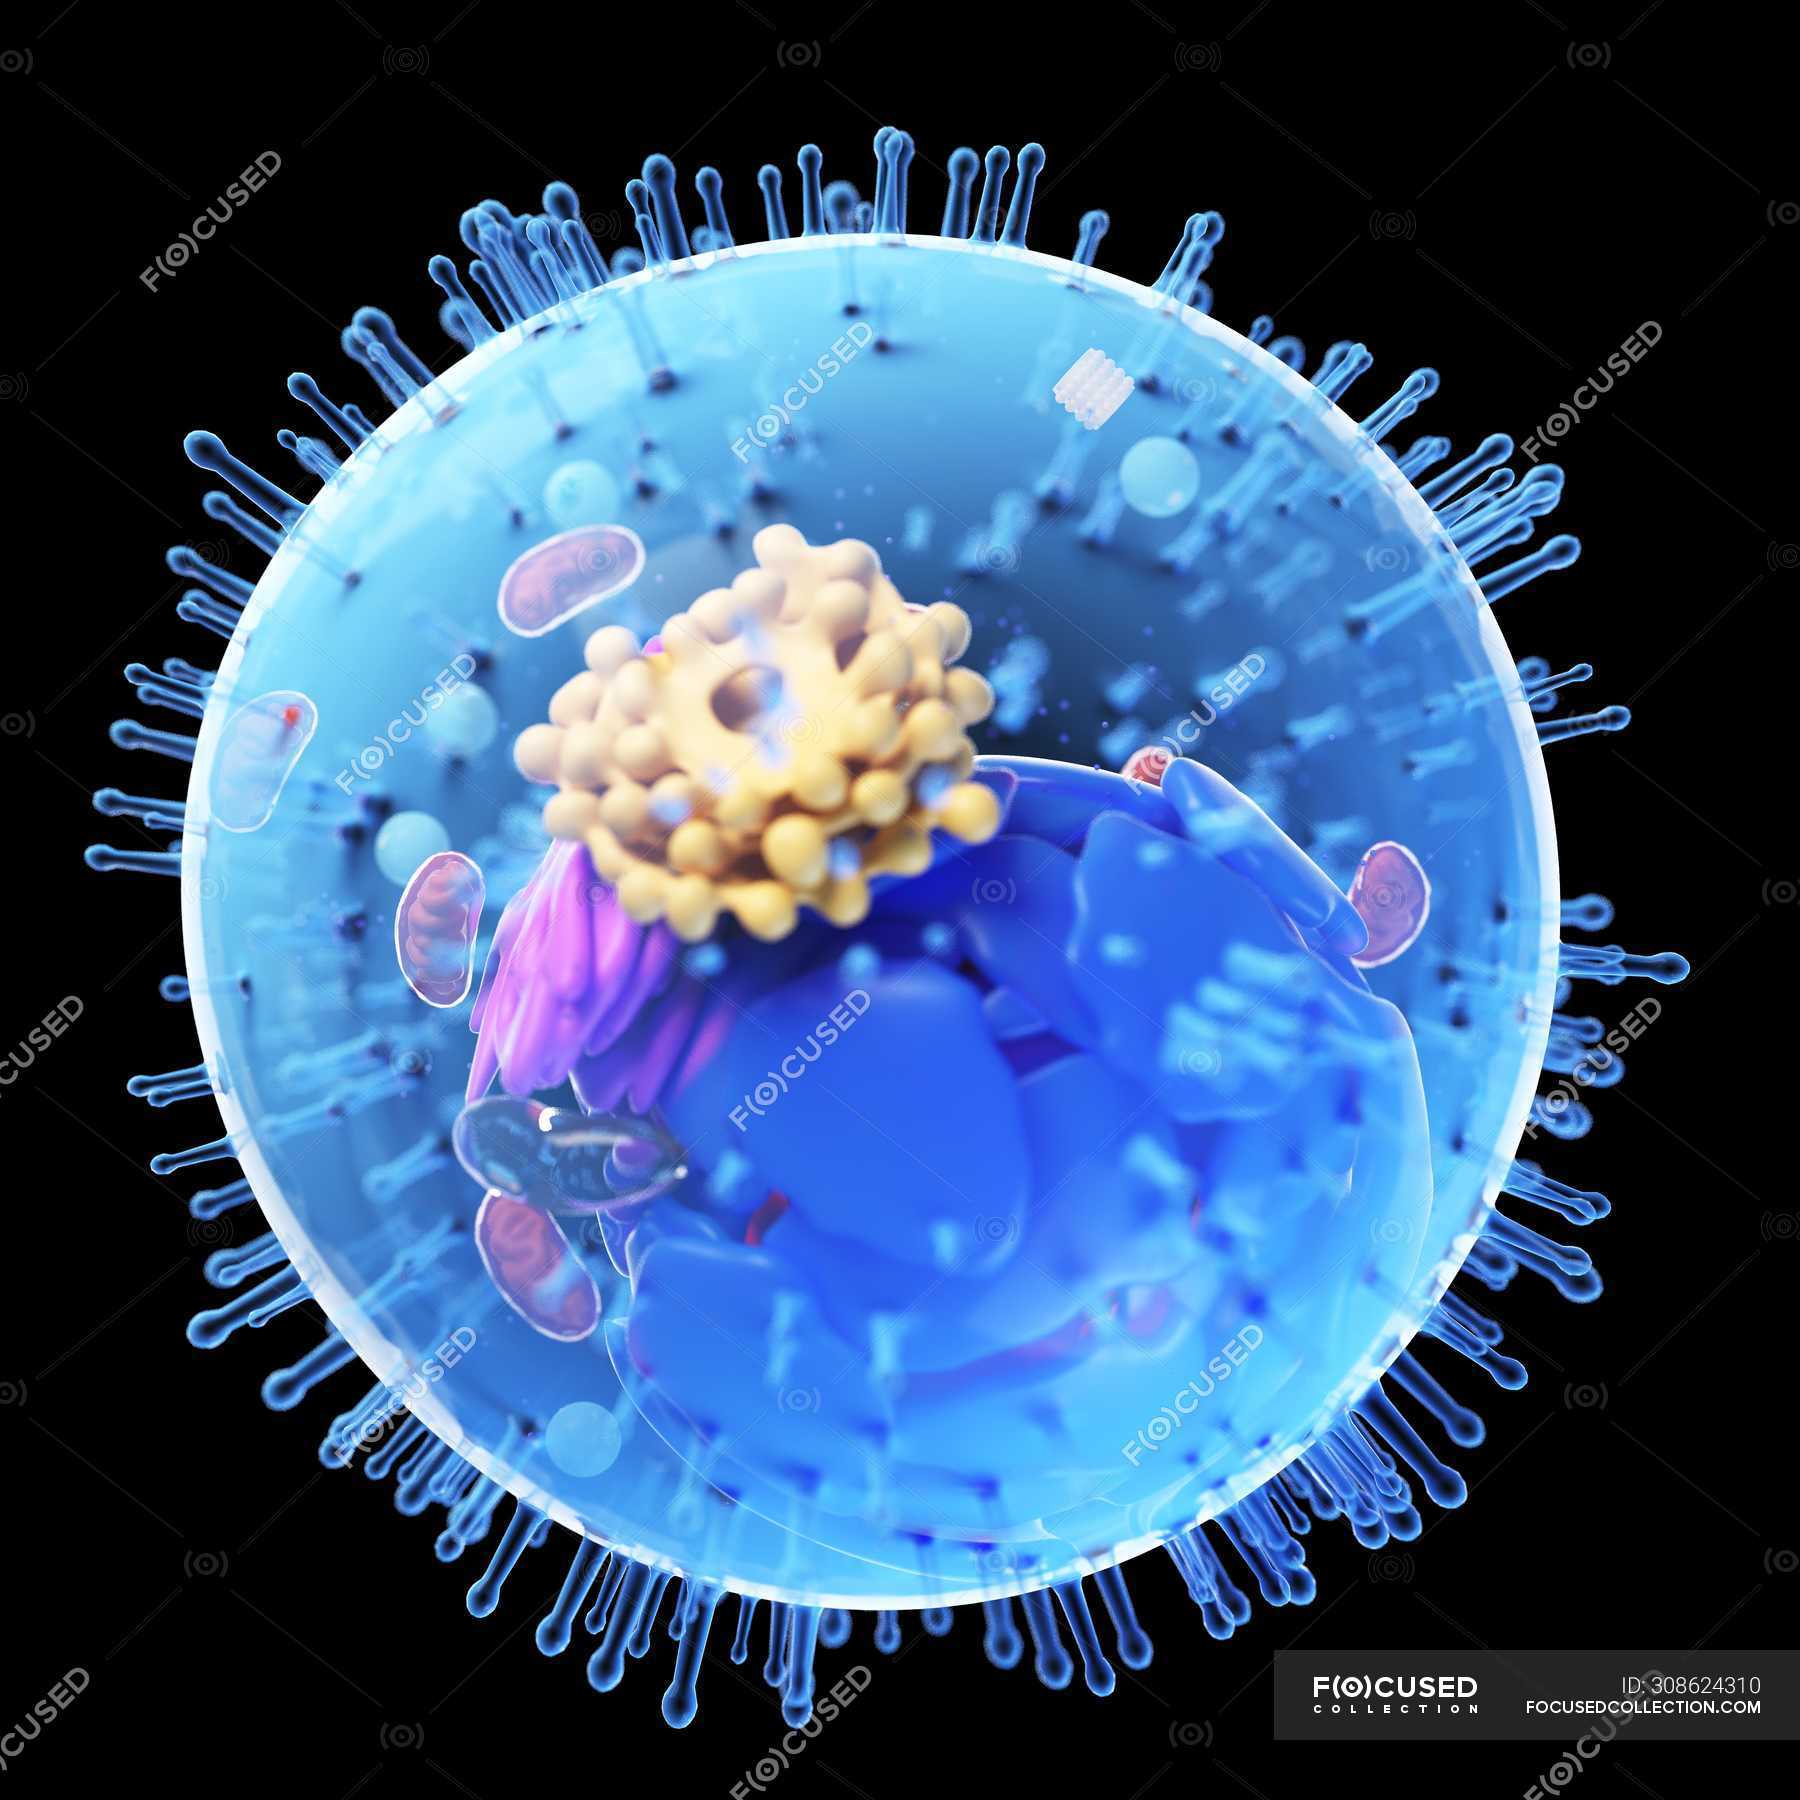 Abstract animal cell on black background, digital illustration. —  functional, transparent - Stock Photo | #308624310